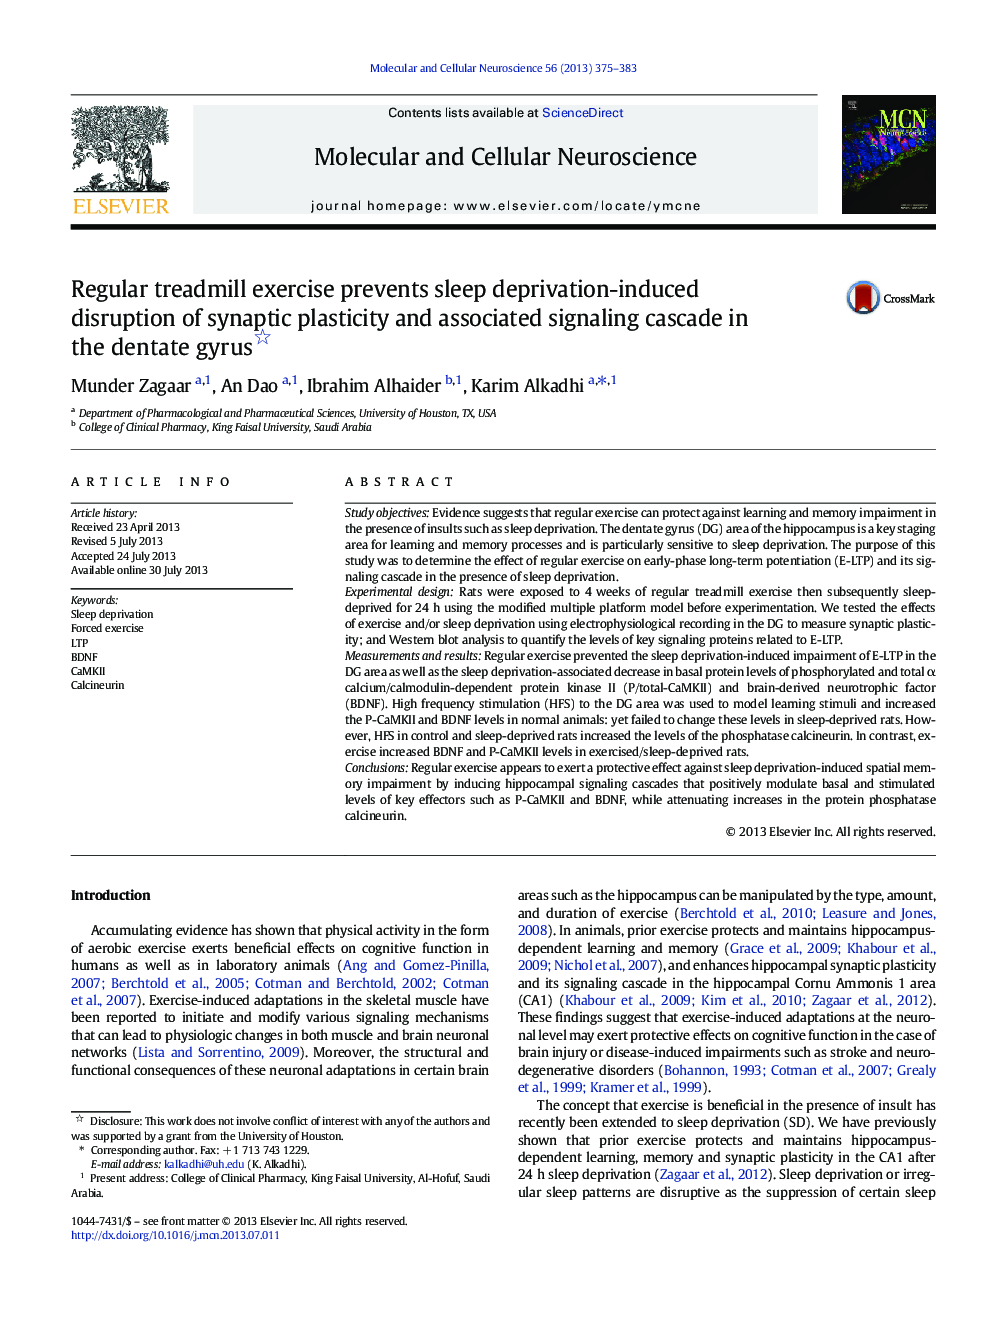 Regular treadmill exercise prevents sleep deprivation-induced disruption of synaptic plasticity and associated signaling cascade in the dentate gyrus